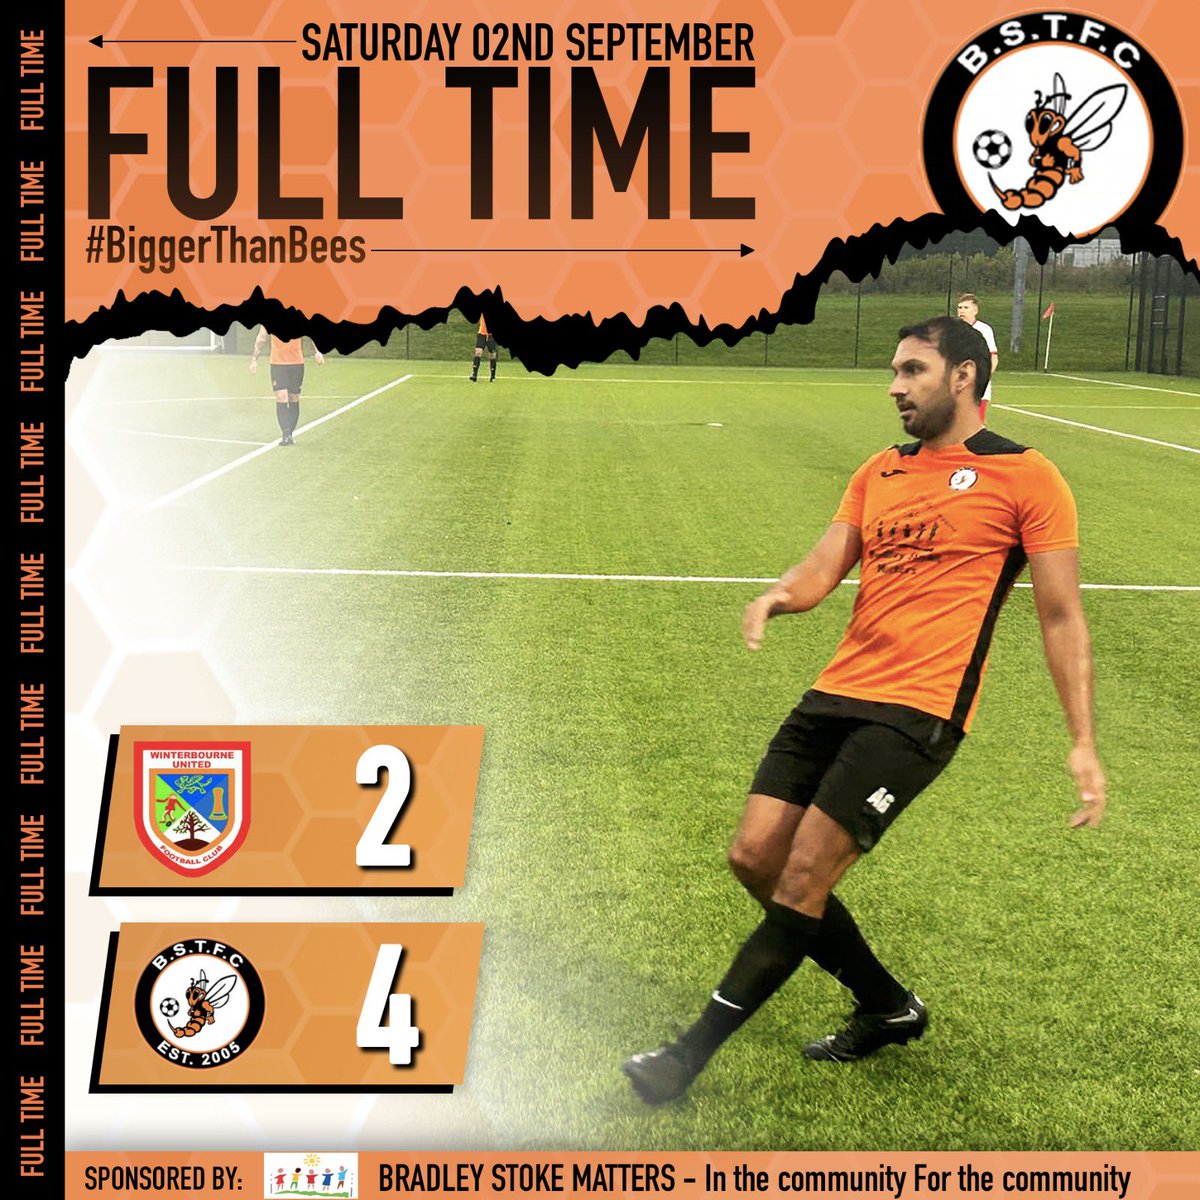 Solid start to the season for the 1sts, with a victory over @FcWinterbourne 🐝 ⚽️⚽️ Steve Johnston ⚽️⚽️ @aaronmjgodfrey @BS_Matters 🧡🖤